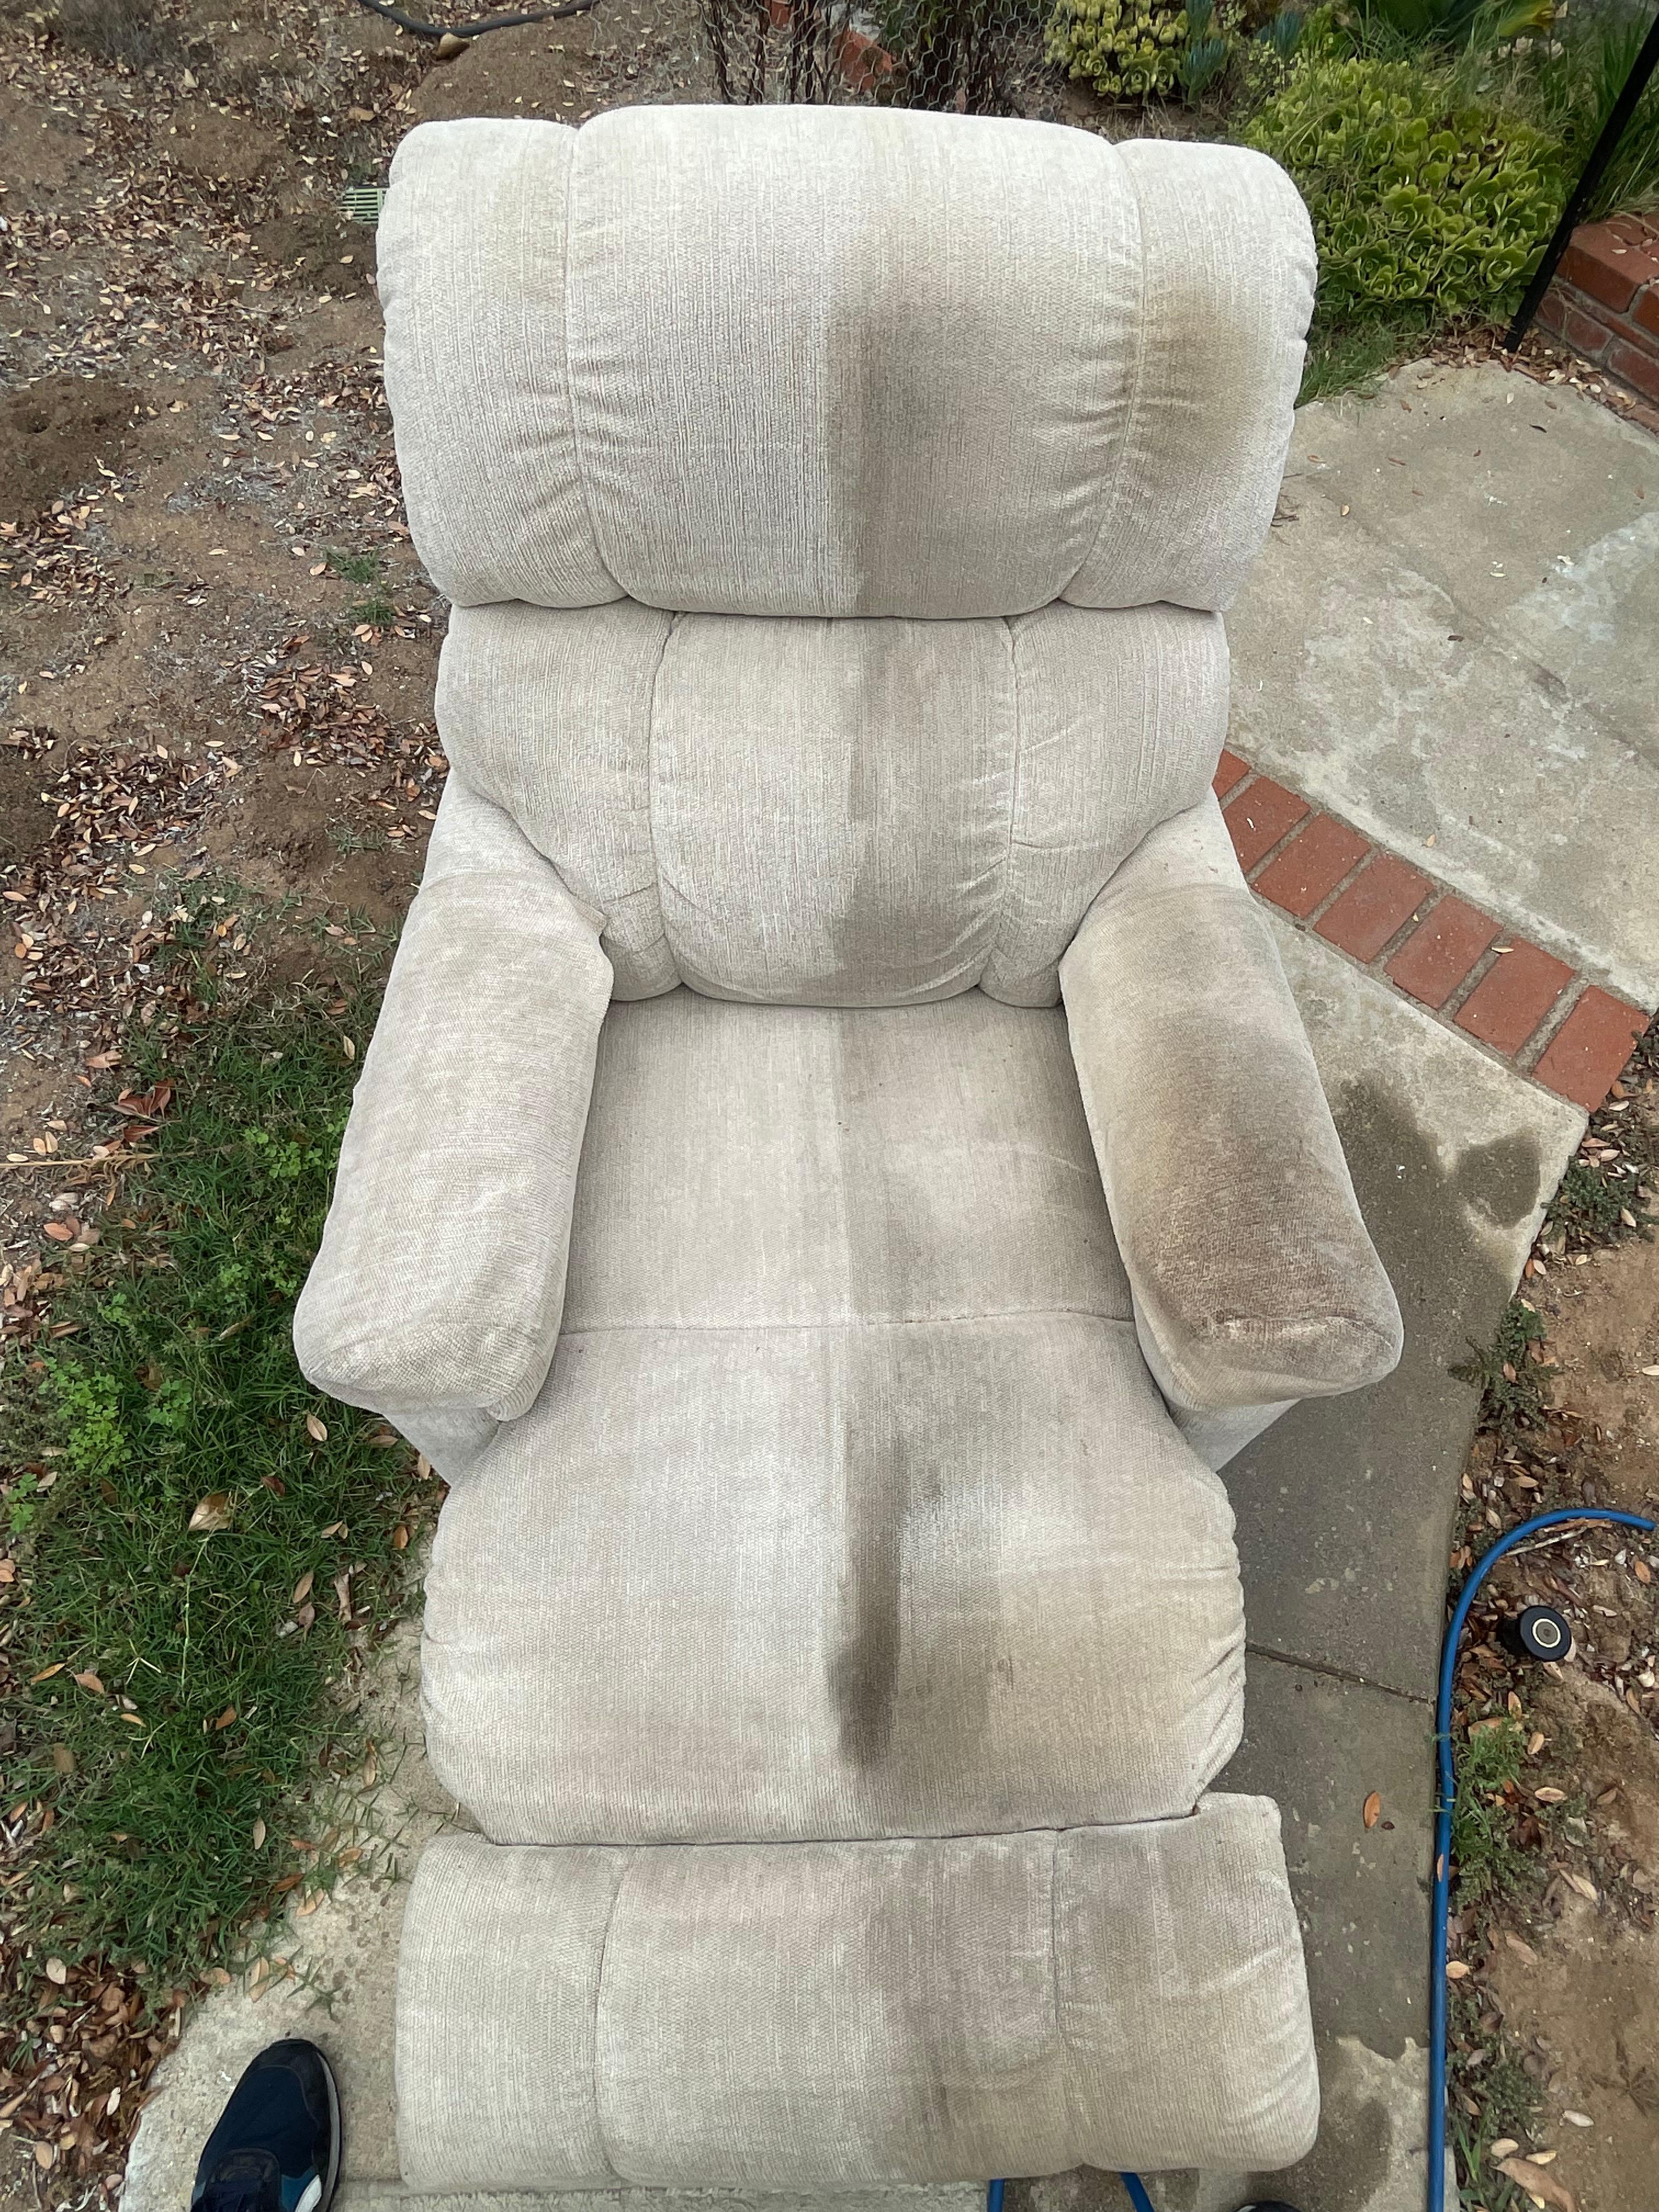 before and after upholstery cleaning in anderson White River Chem-Dry Muncie (765)217-4337